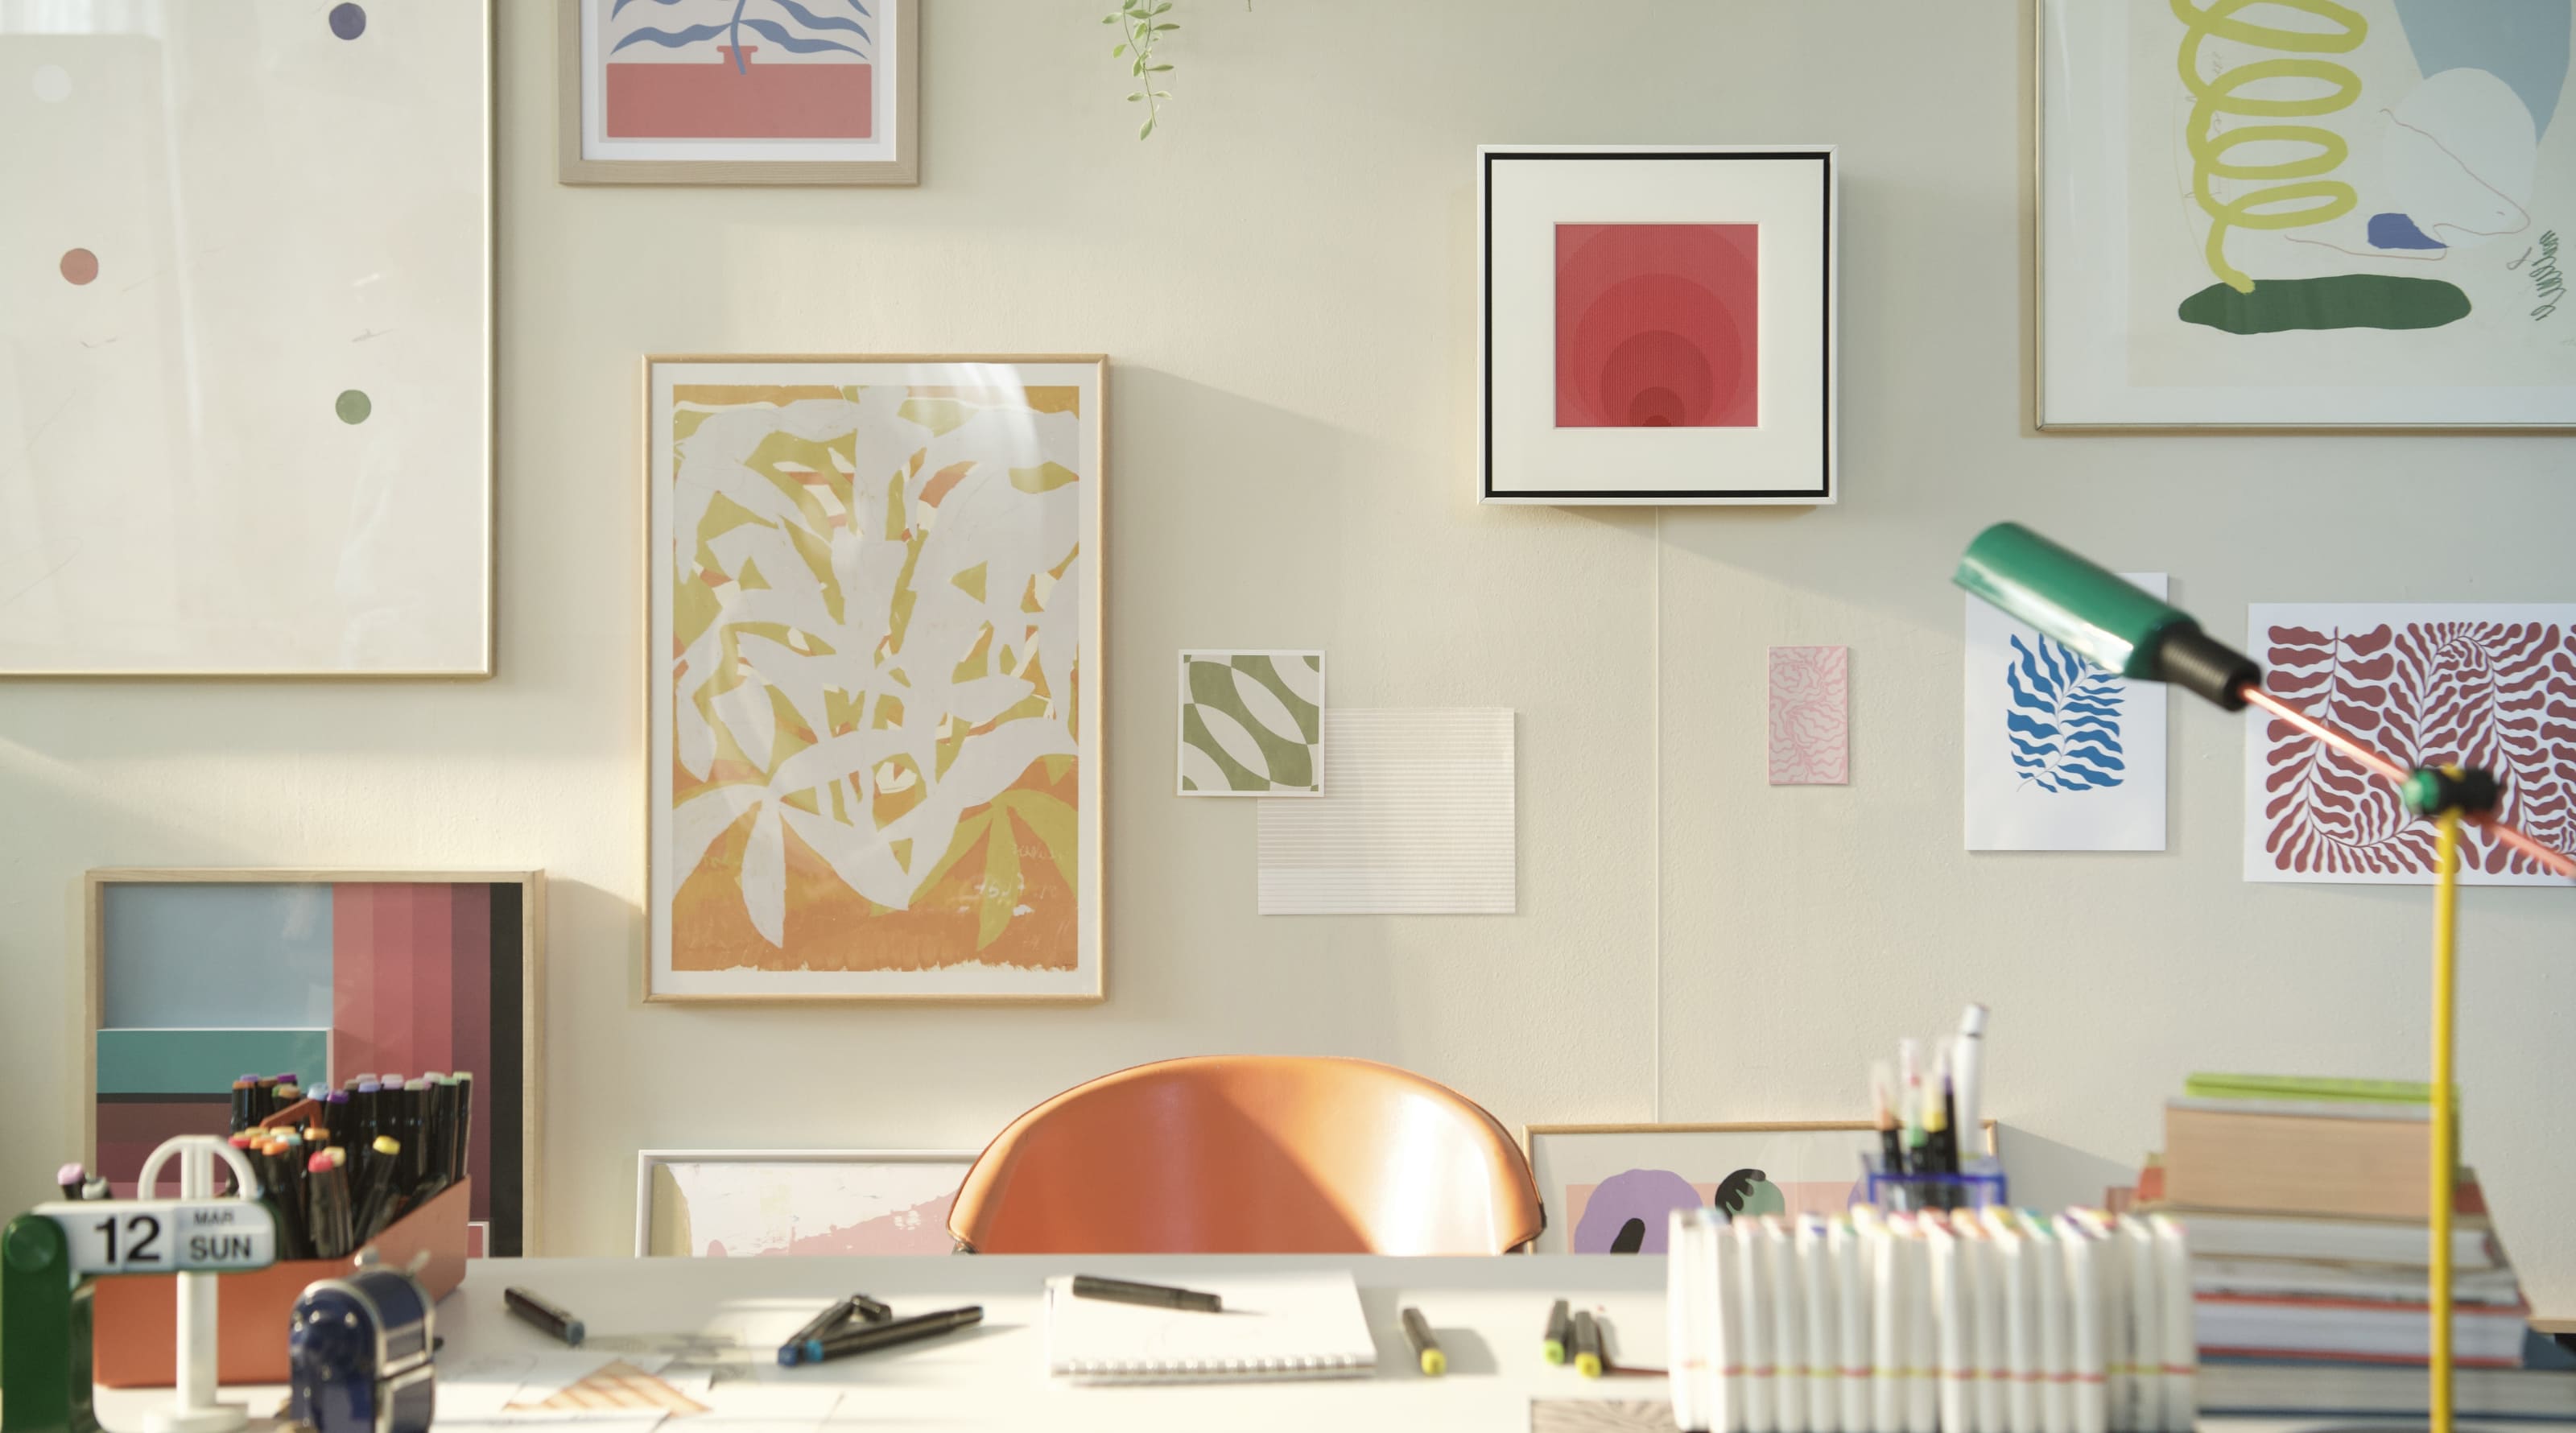 Daytime, bright sunlight illuminates a room that appears to be an artist's studio. A Music Frame hangs harmoniously on one wall alongside a variety of framed paintings. 